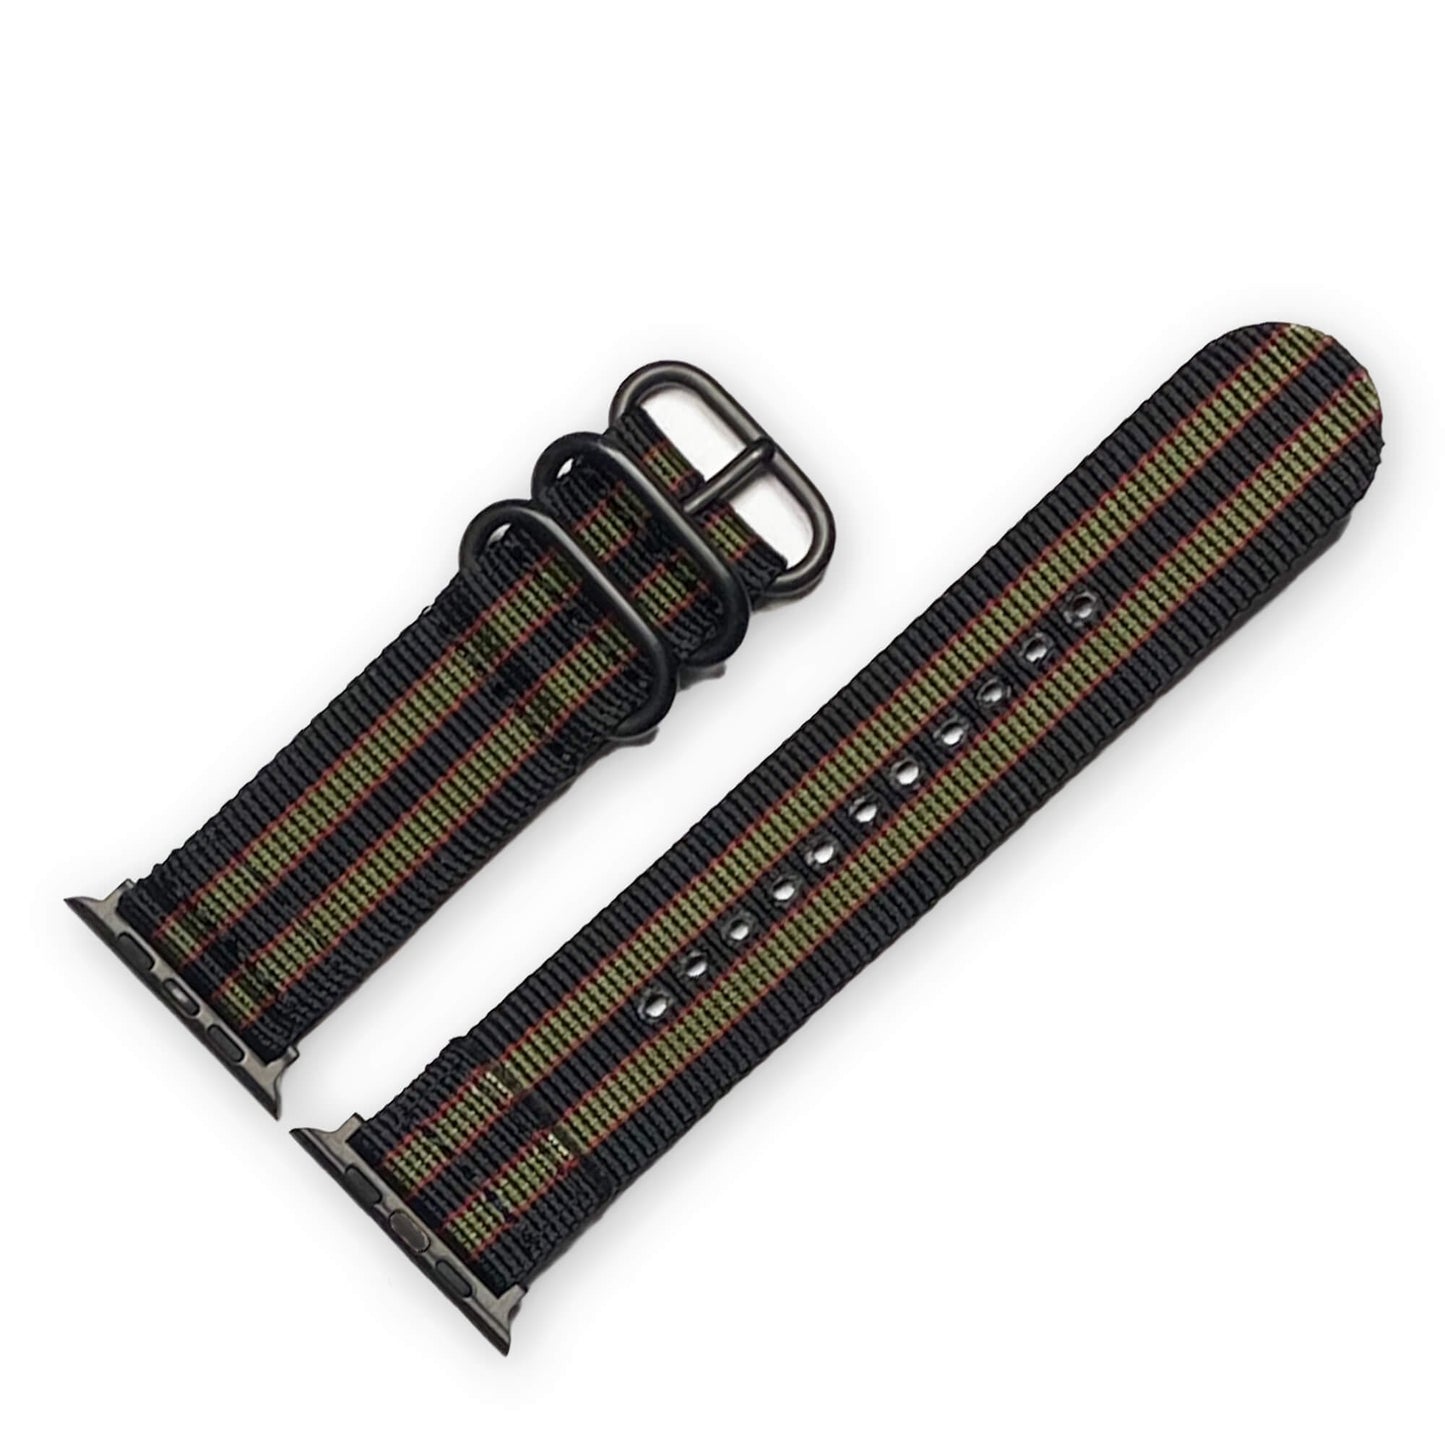 MI6 Bond Two Piece Ballistic Nylon Watch Band | Compatible with Apple Watch | PVD Hardware